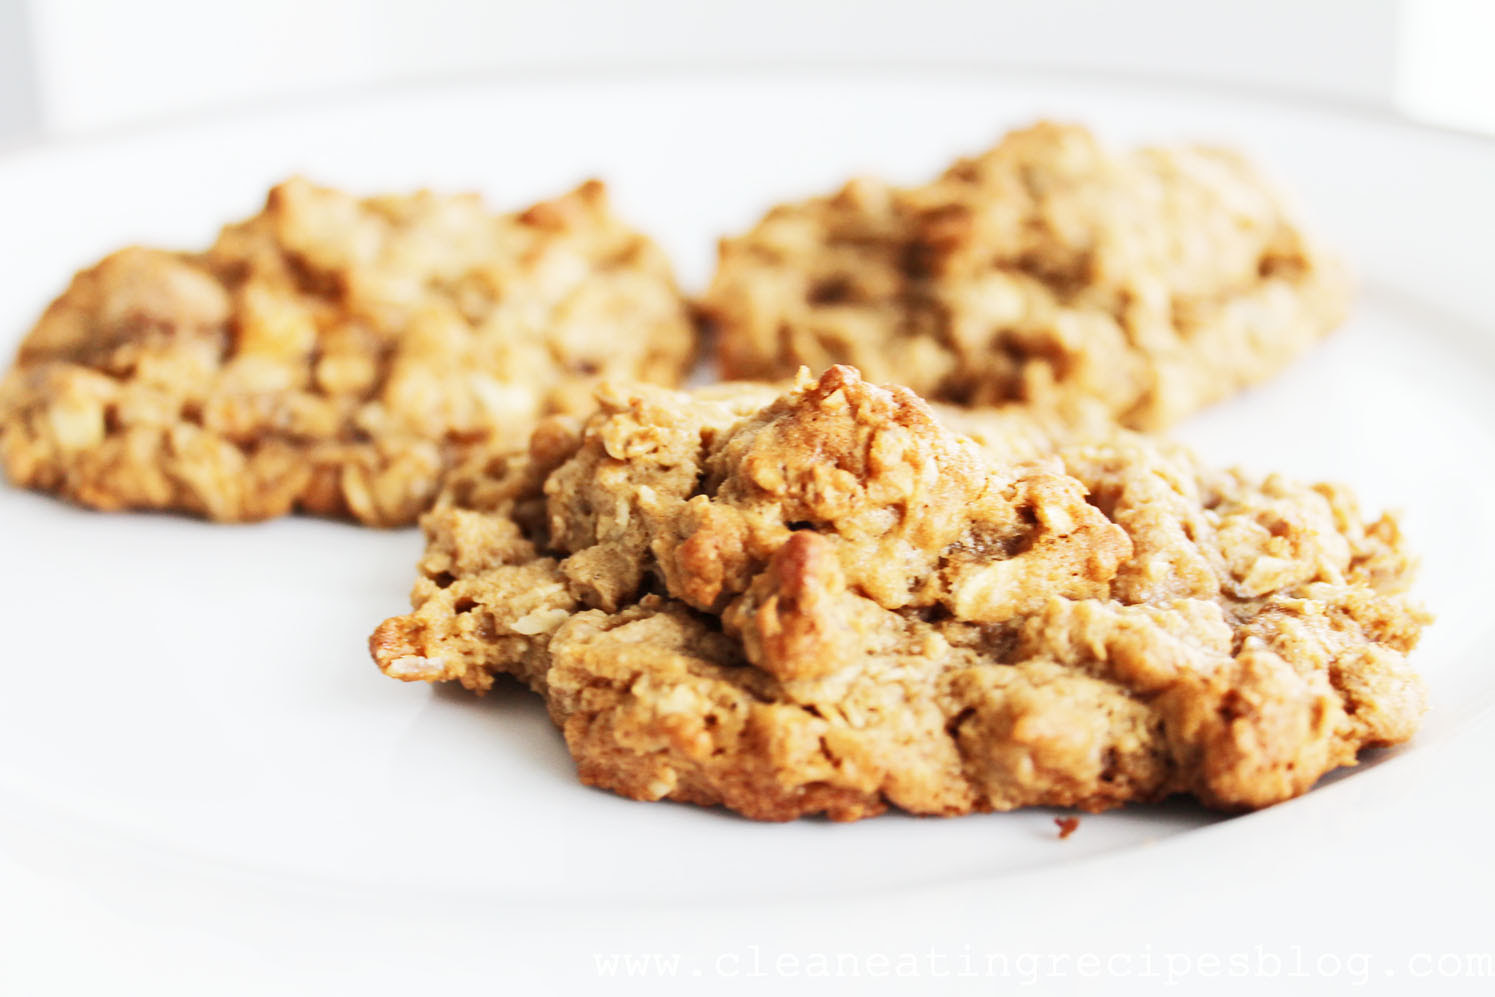 WORKOUT LOSE WEIGHT: Clean Eating Dessert - Oatmeal Peanut Butter Cookie.